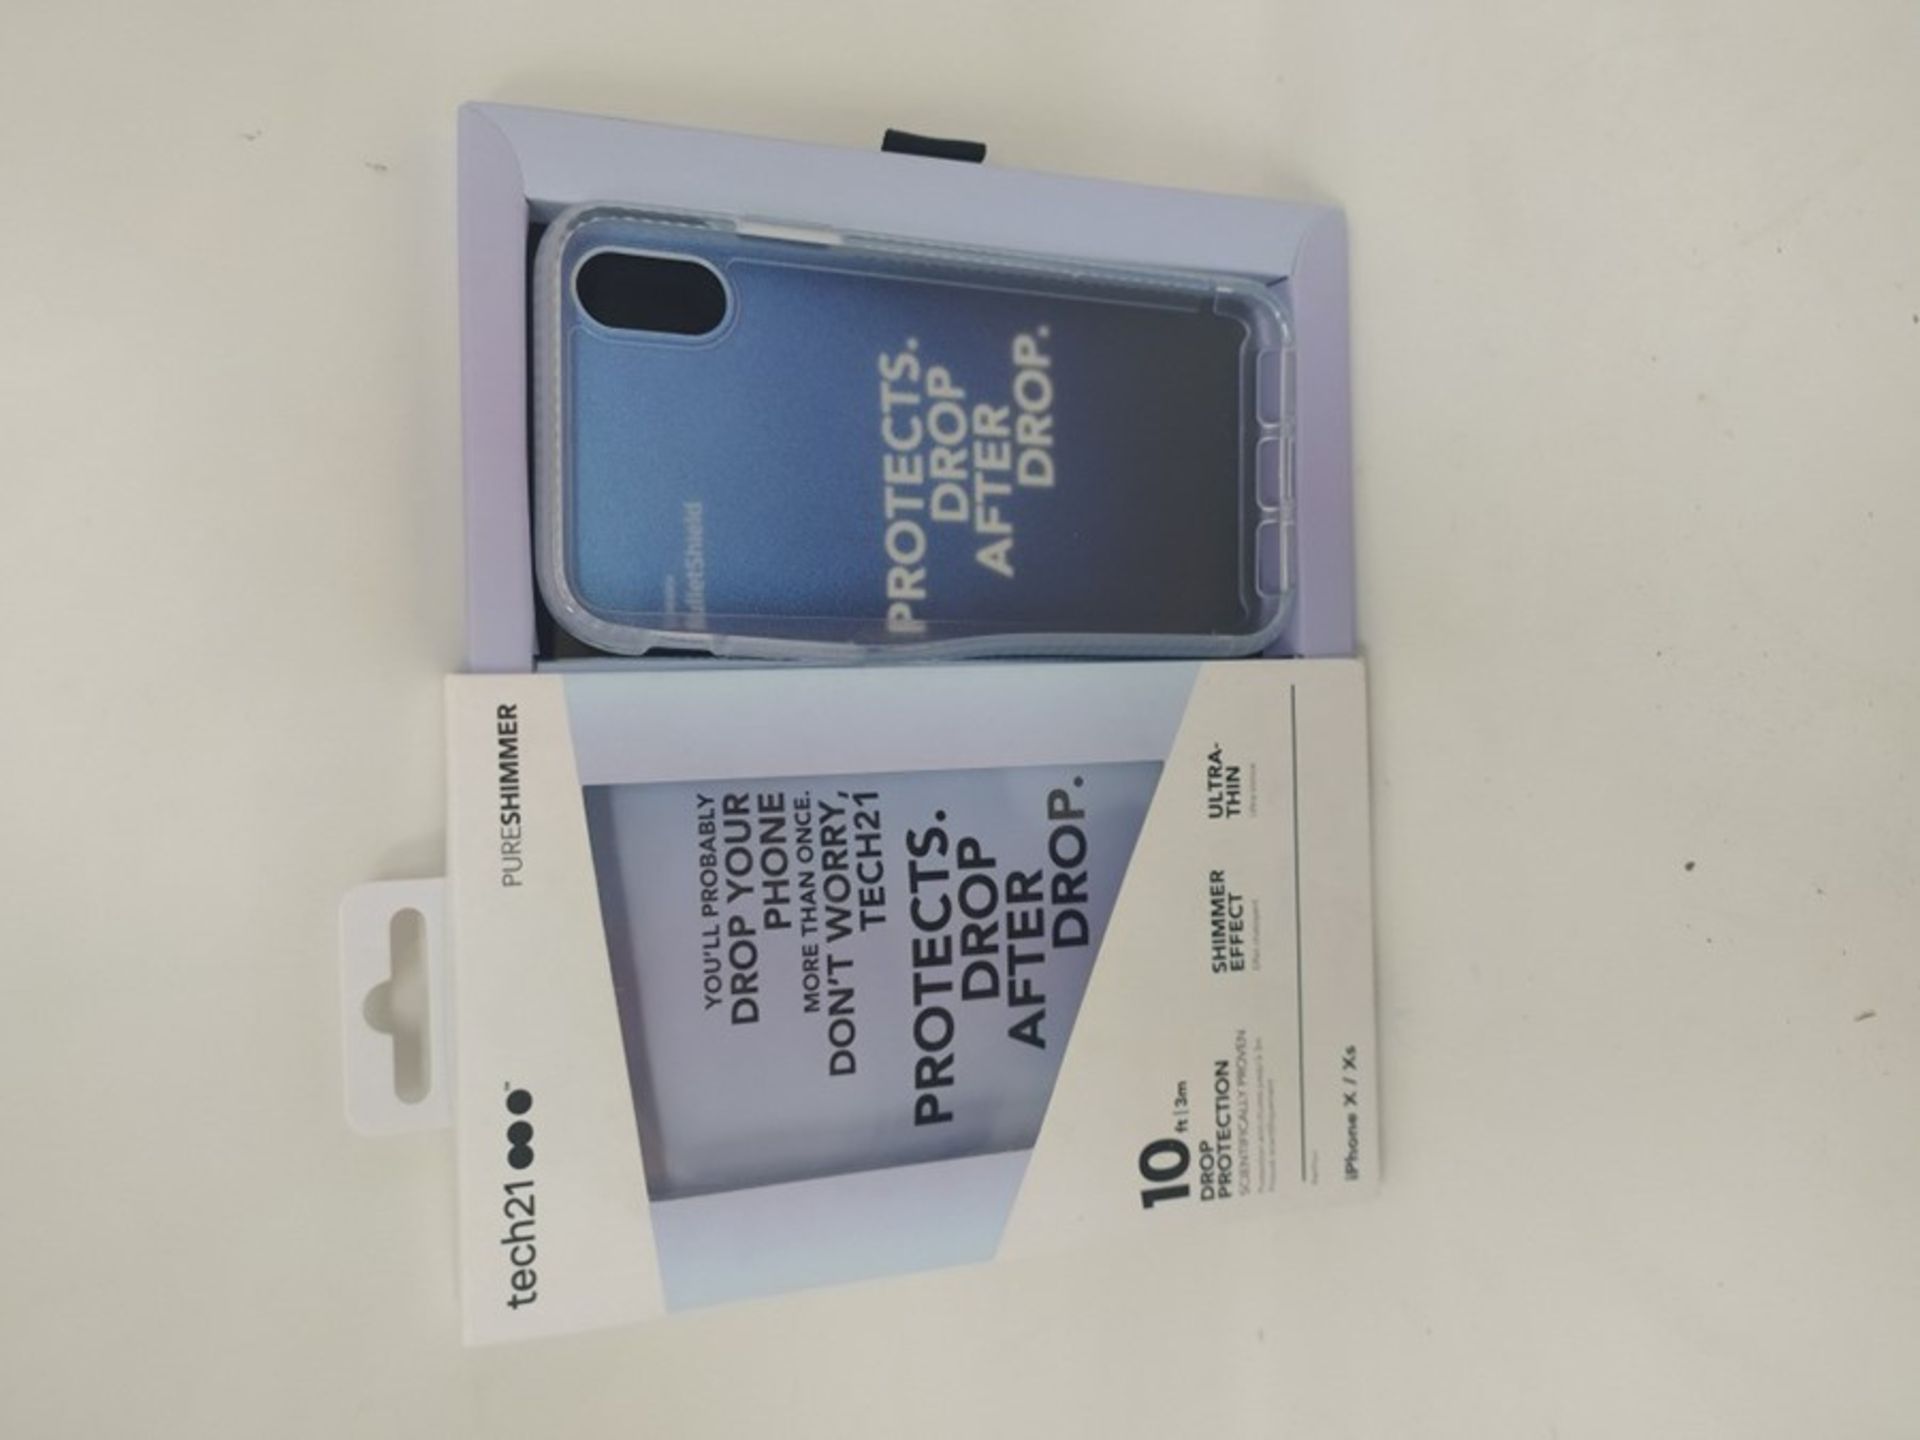 Tech Enterprises Evo Check for Apple iPhone XS Max - Midnight Blue - Image 2 of 2